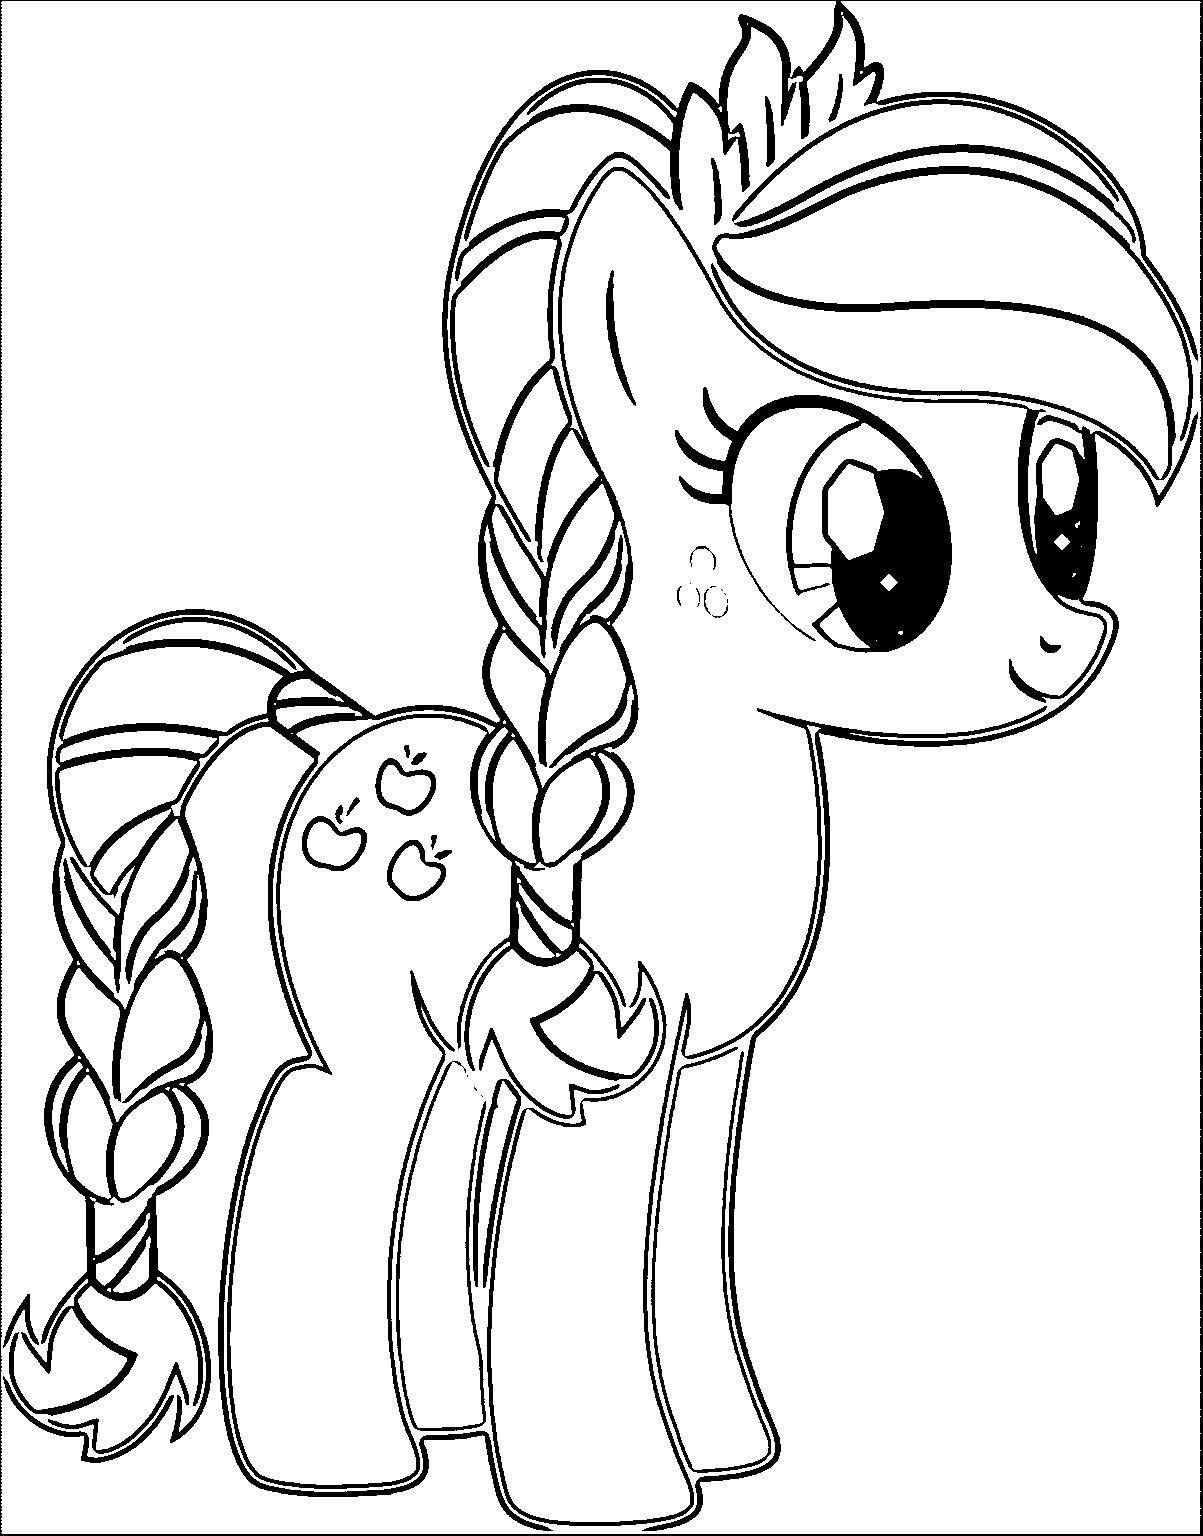 Best ideas about My Little Pony Coloring Pages For Kids
. Save or Pin pony cartoon my little pony coloring page 003 Now.